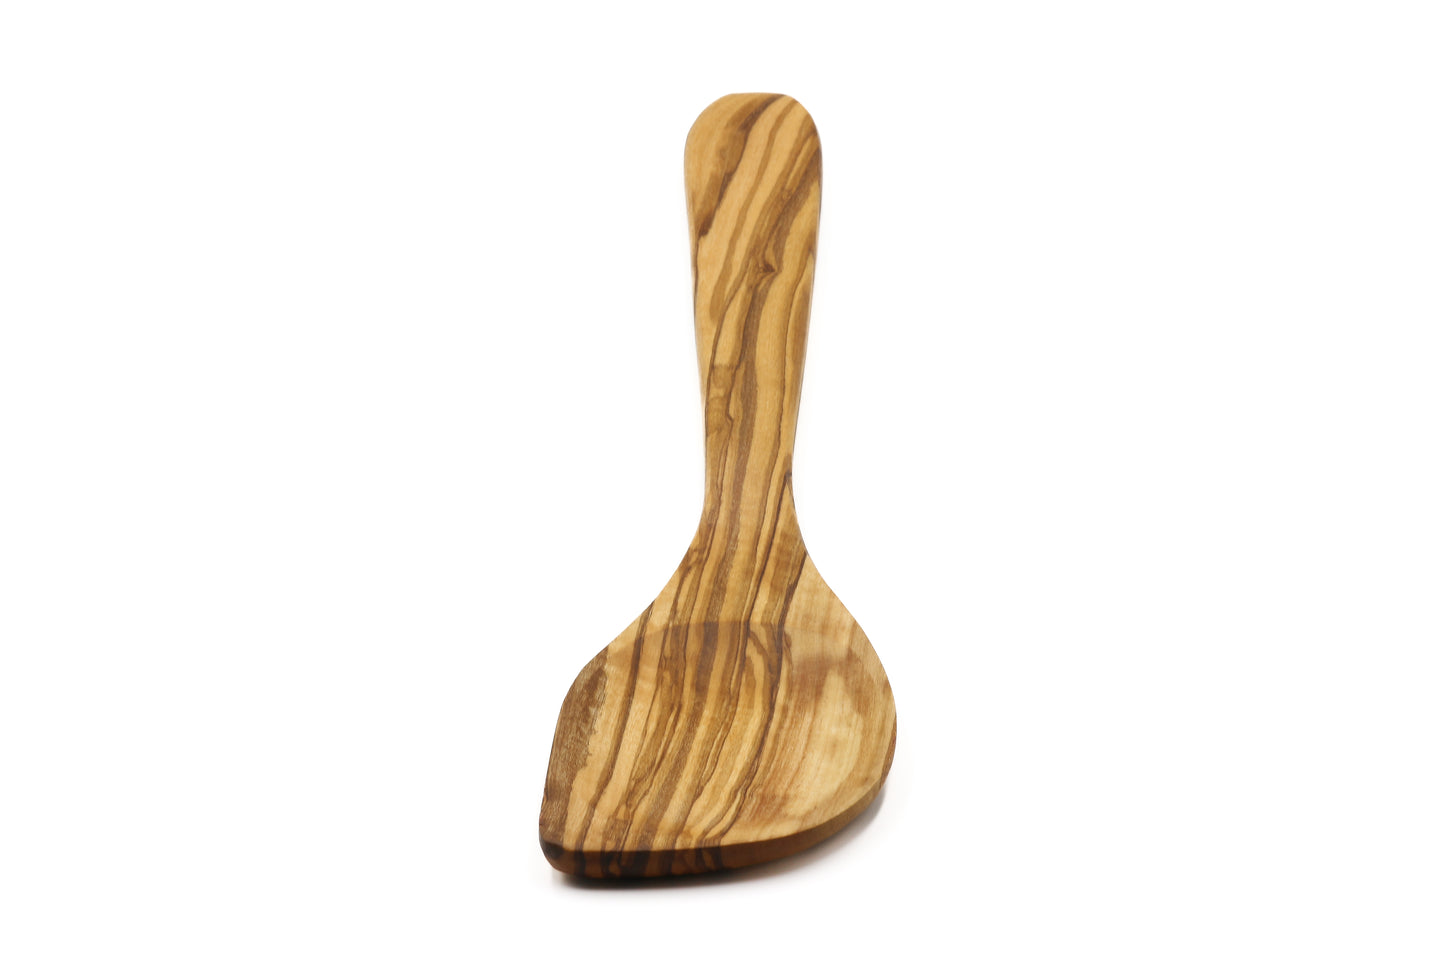 Sustainable choice: olive wood spoon for baking and cooking